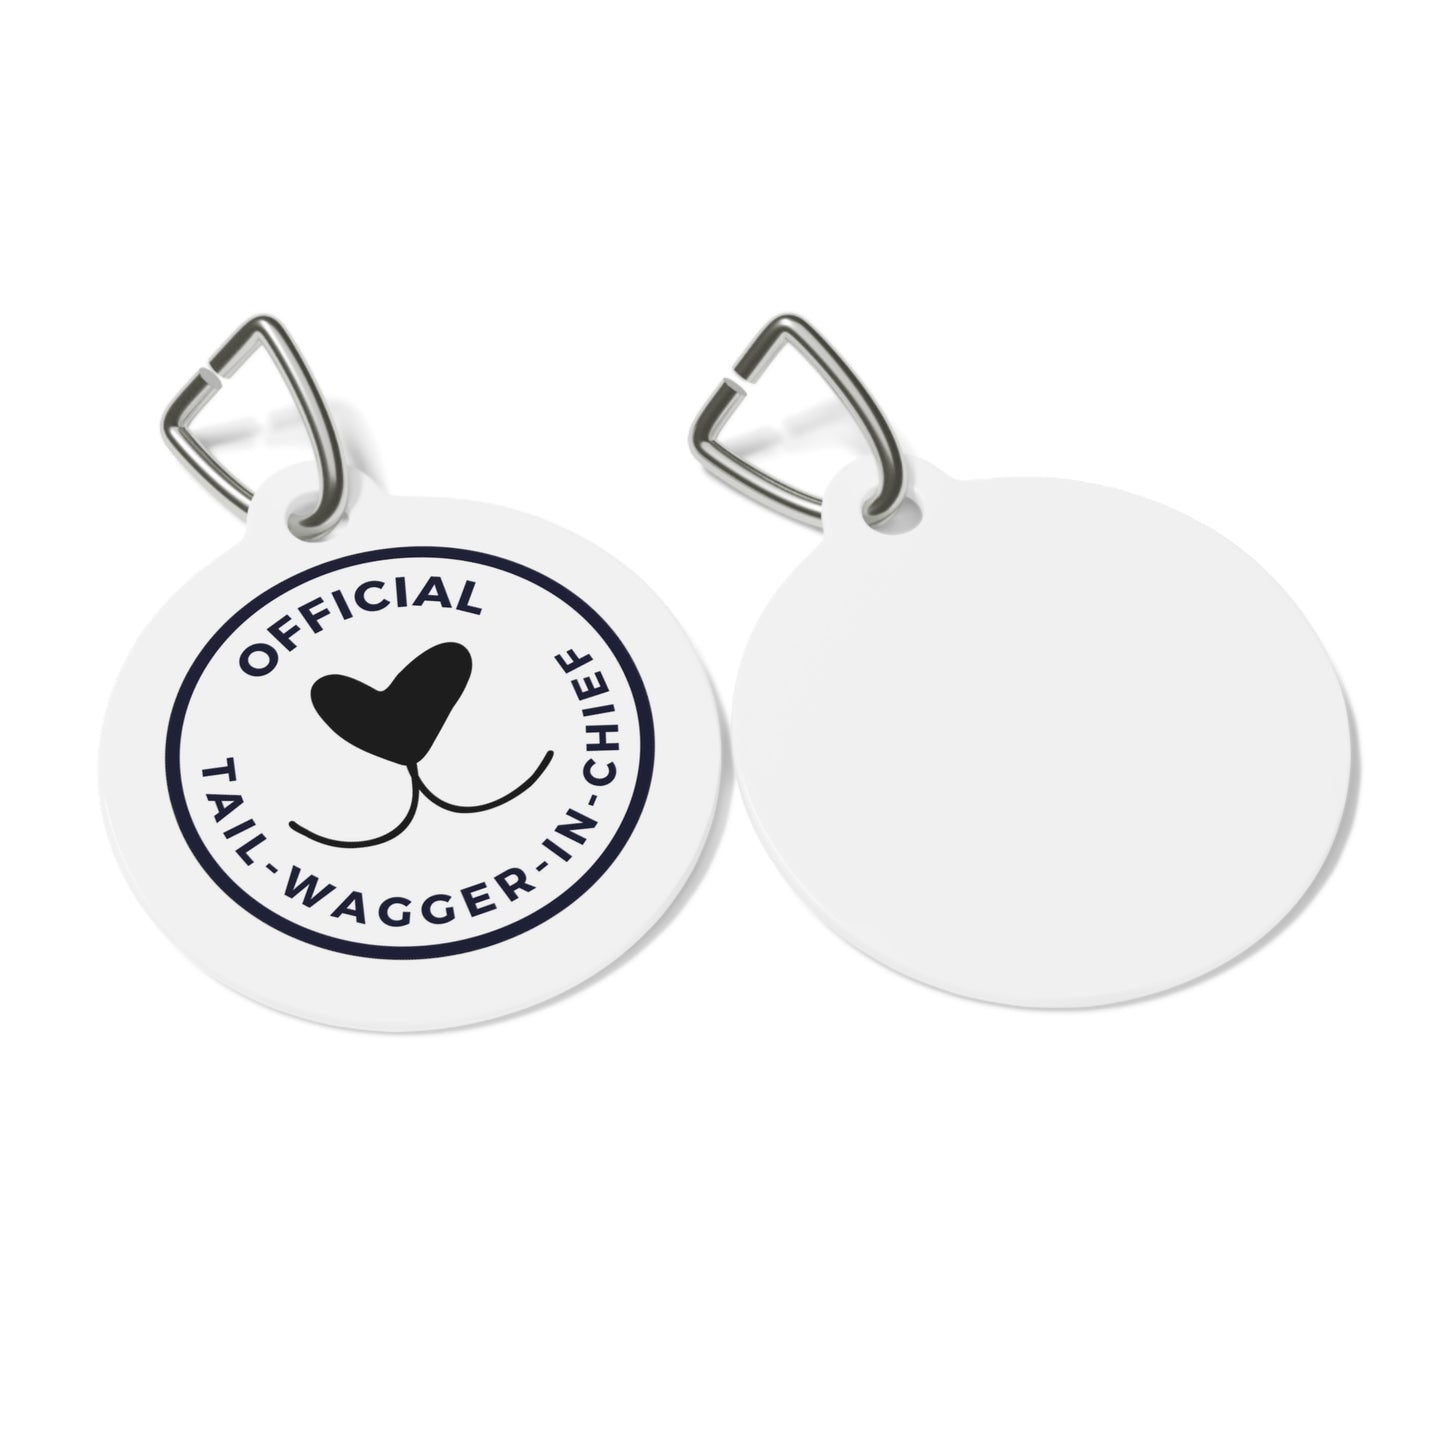 Official Tail-Wagger-in-Chief - Pet Tag (white)